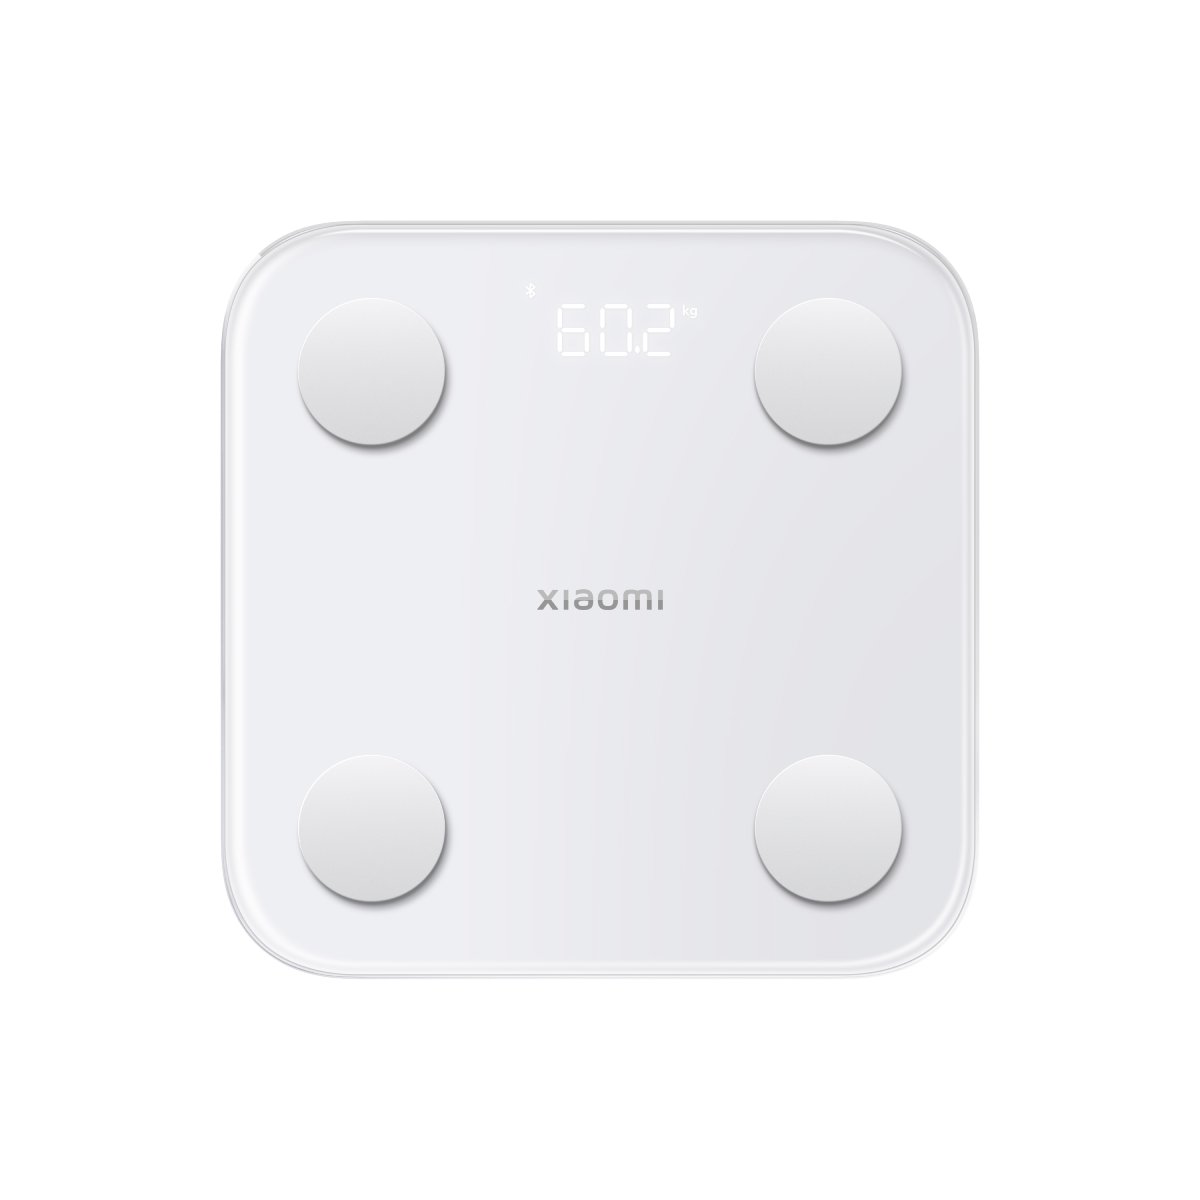 Xiaomi Body Composition Scale S400, , large image number 0